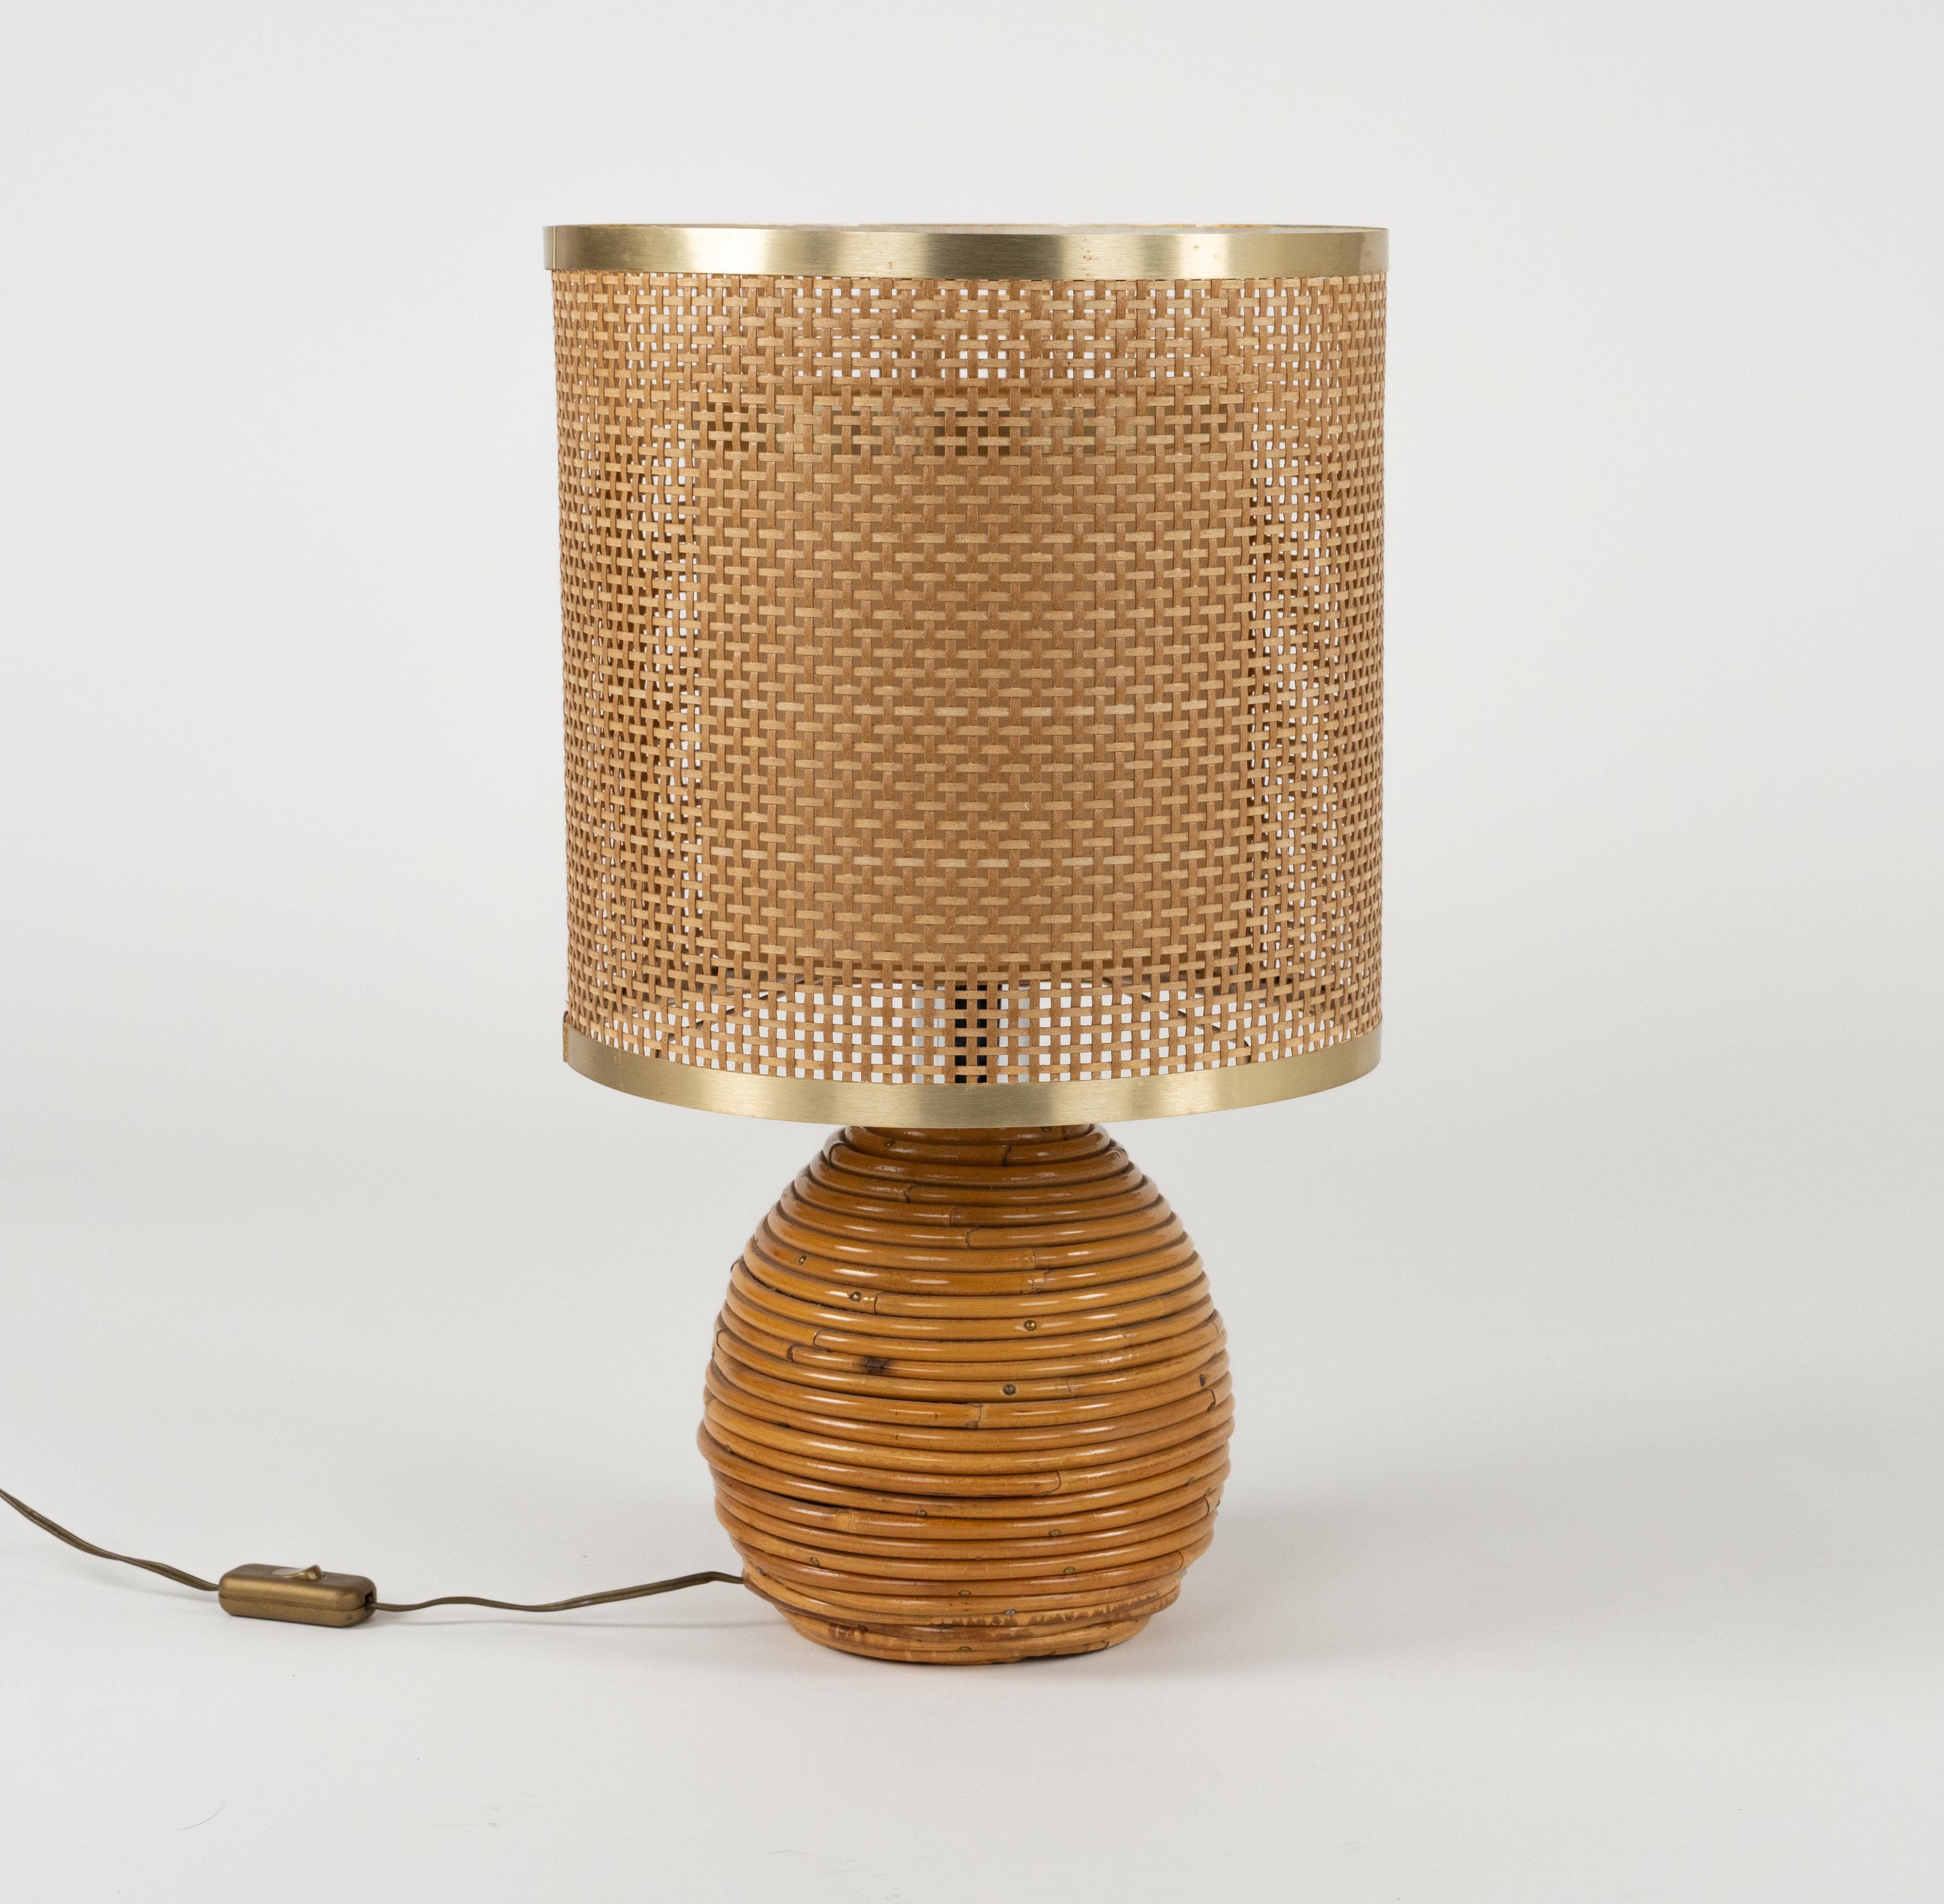 Midcentury Rattan, Wicker and Chrome Table Lamp by Vivai Del Sud, Italy 1970s 1